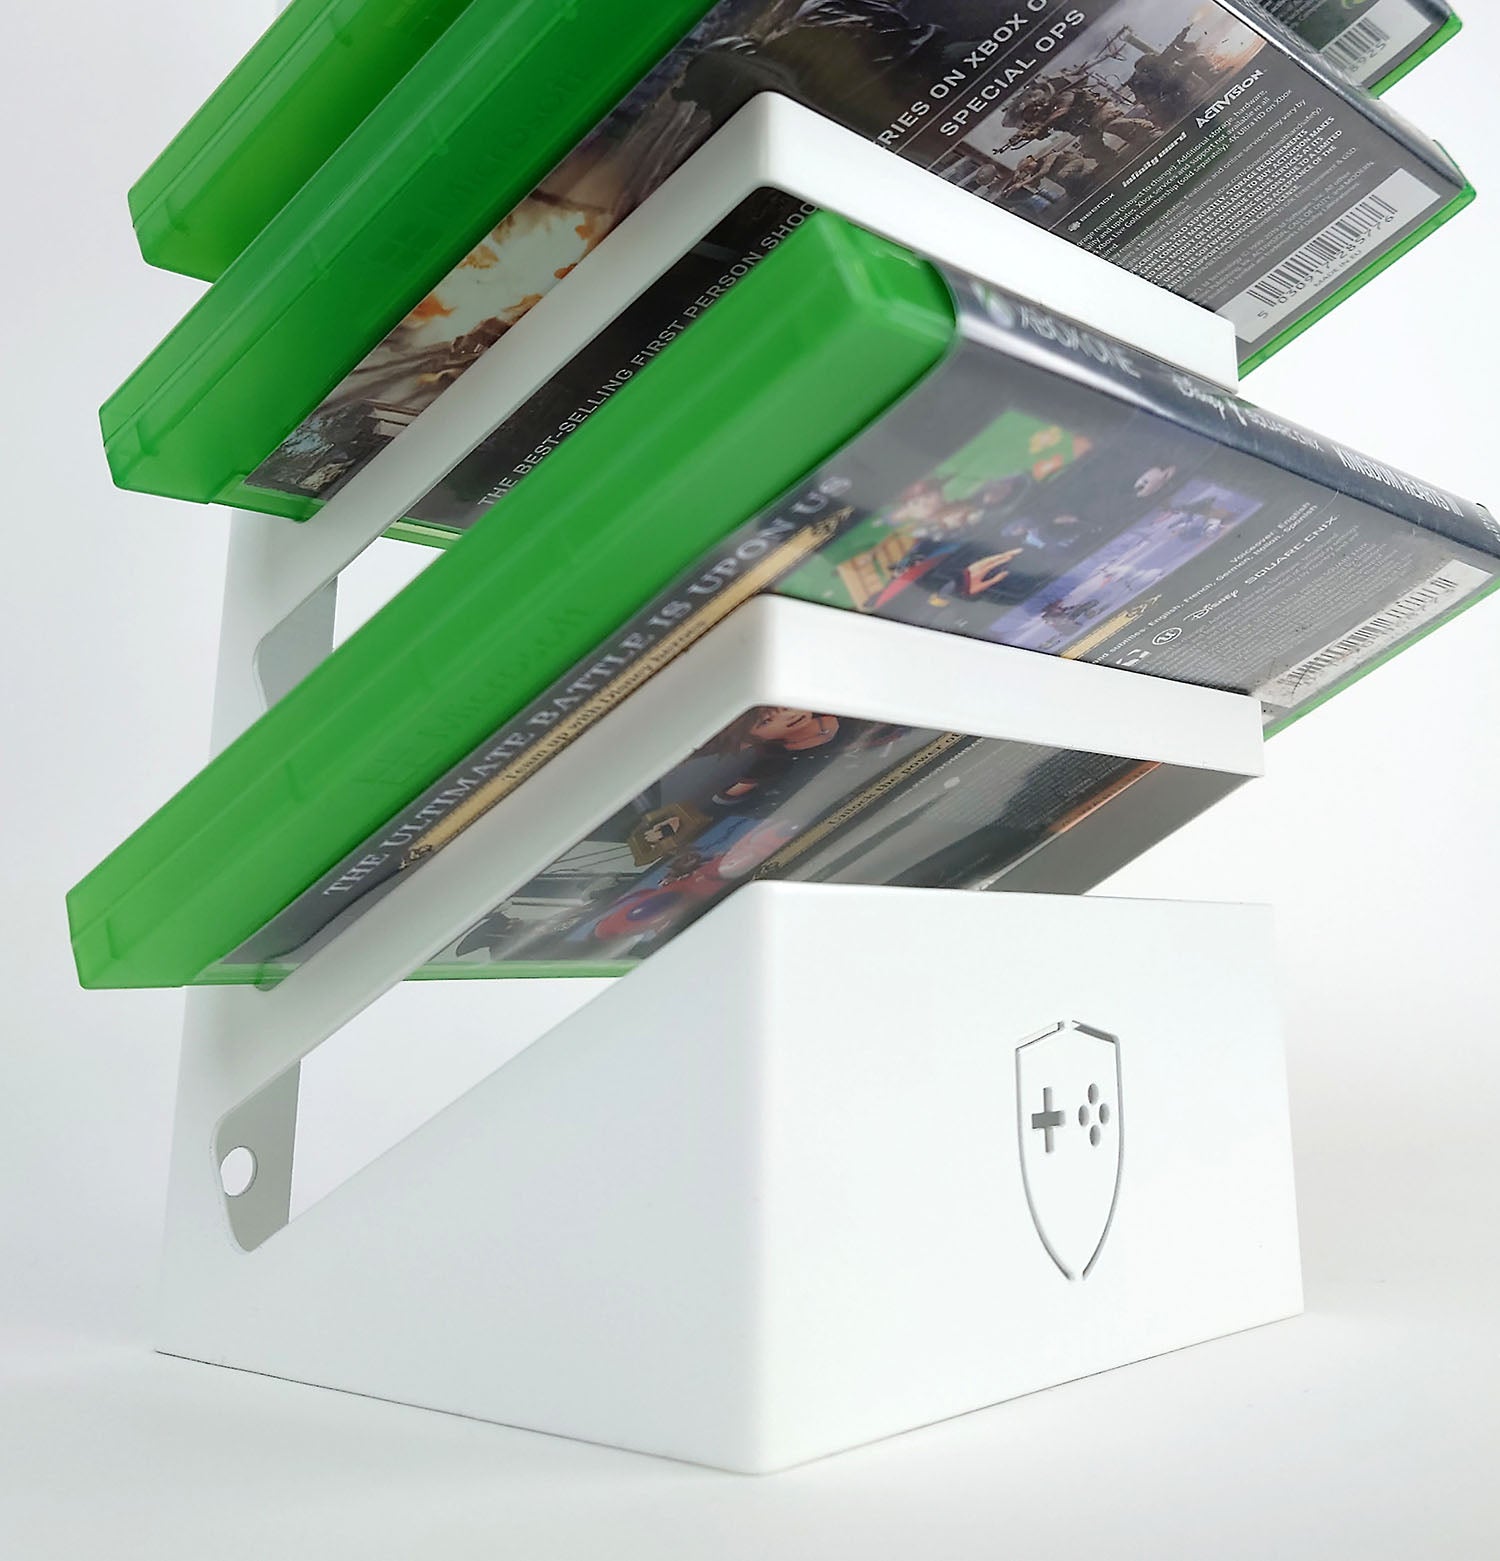 GameShieldz™ Wall Mount Games Storage Tower Rack (3 Sizes Available)